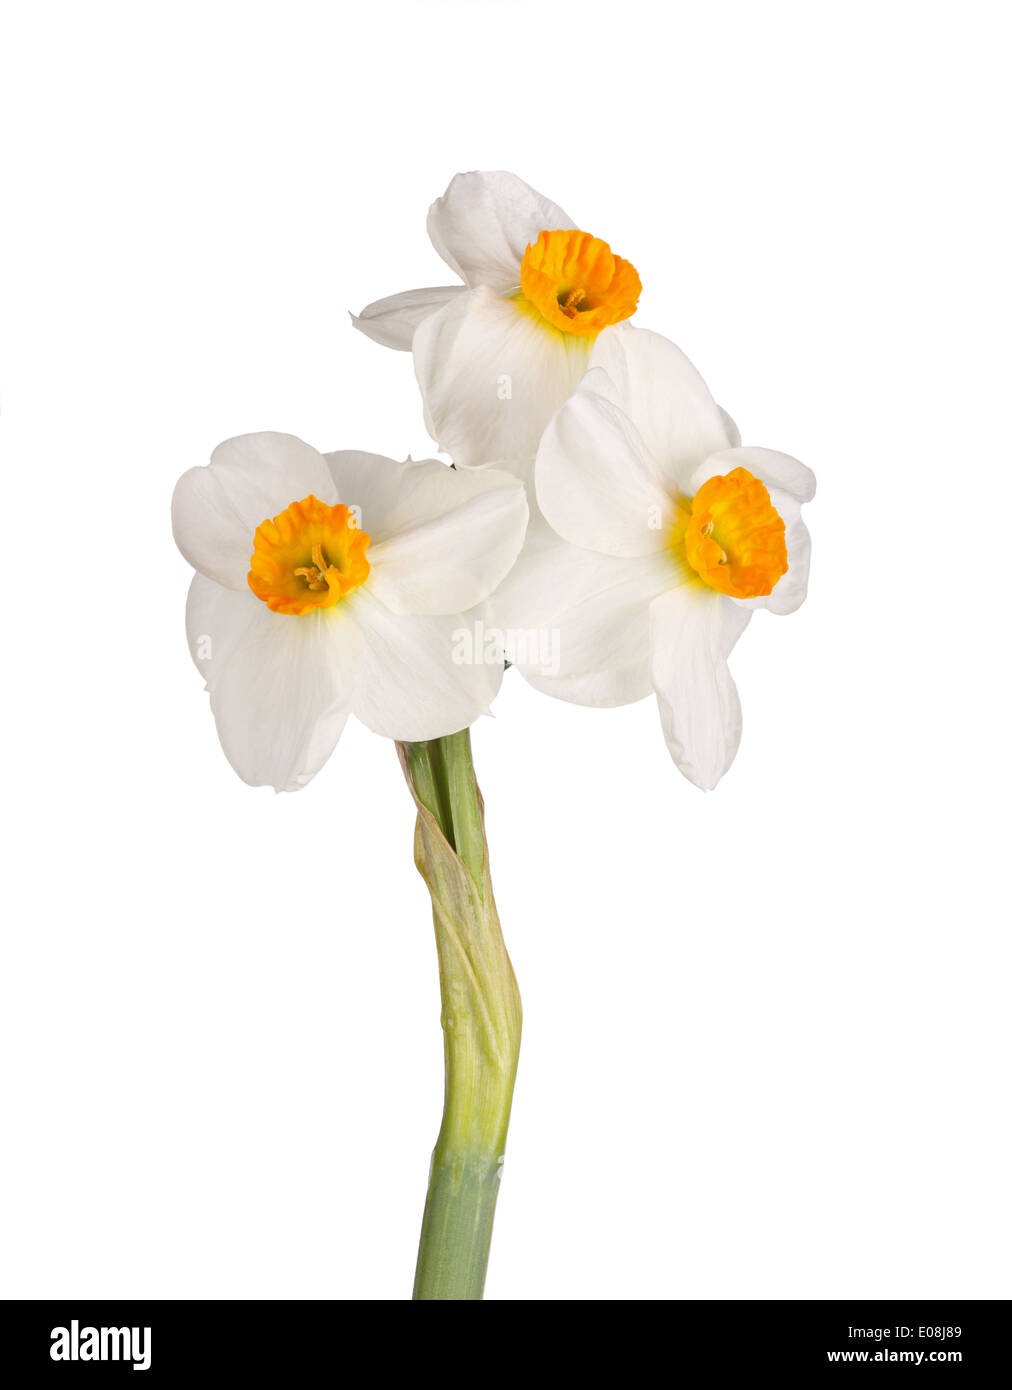 Three flowers of the orange-and-white tazetta daffodil cultivar Geranium isolated on a white background Stock Photo